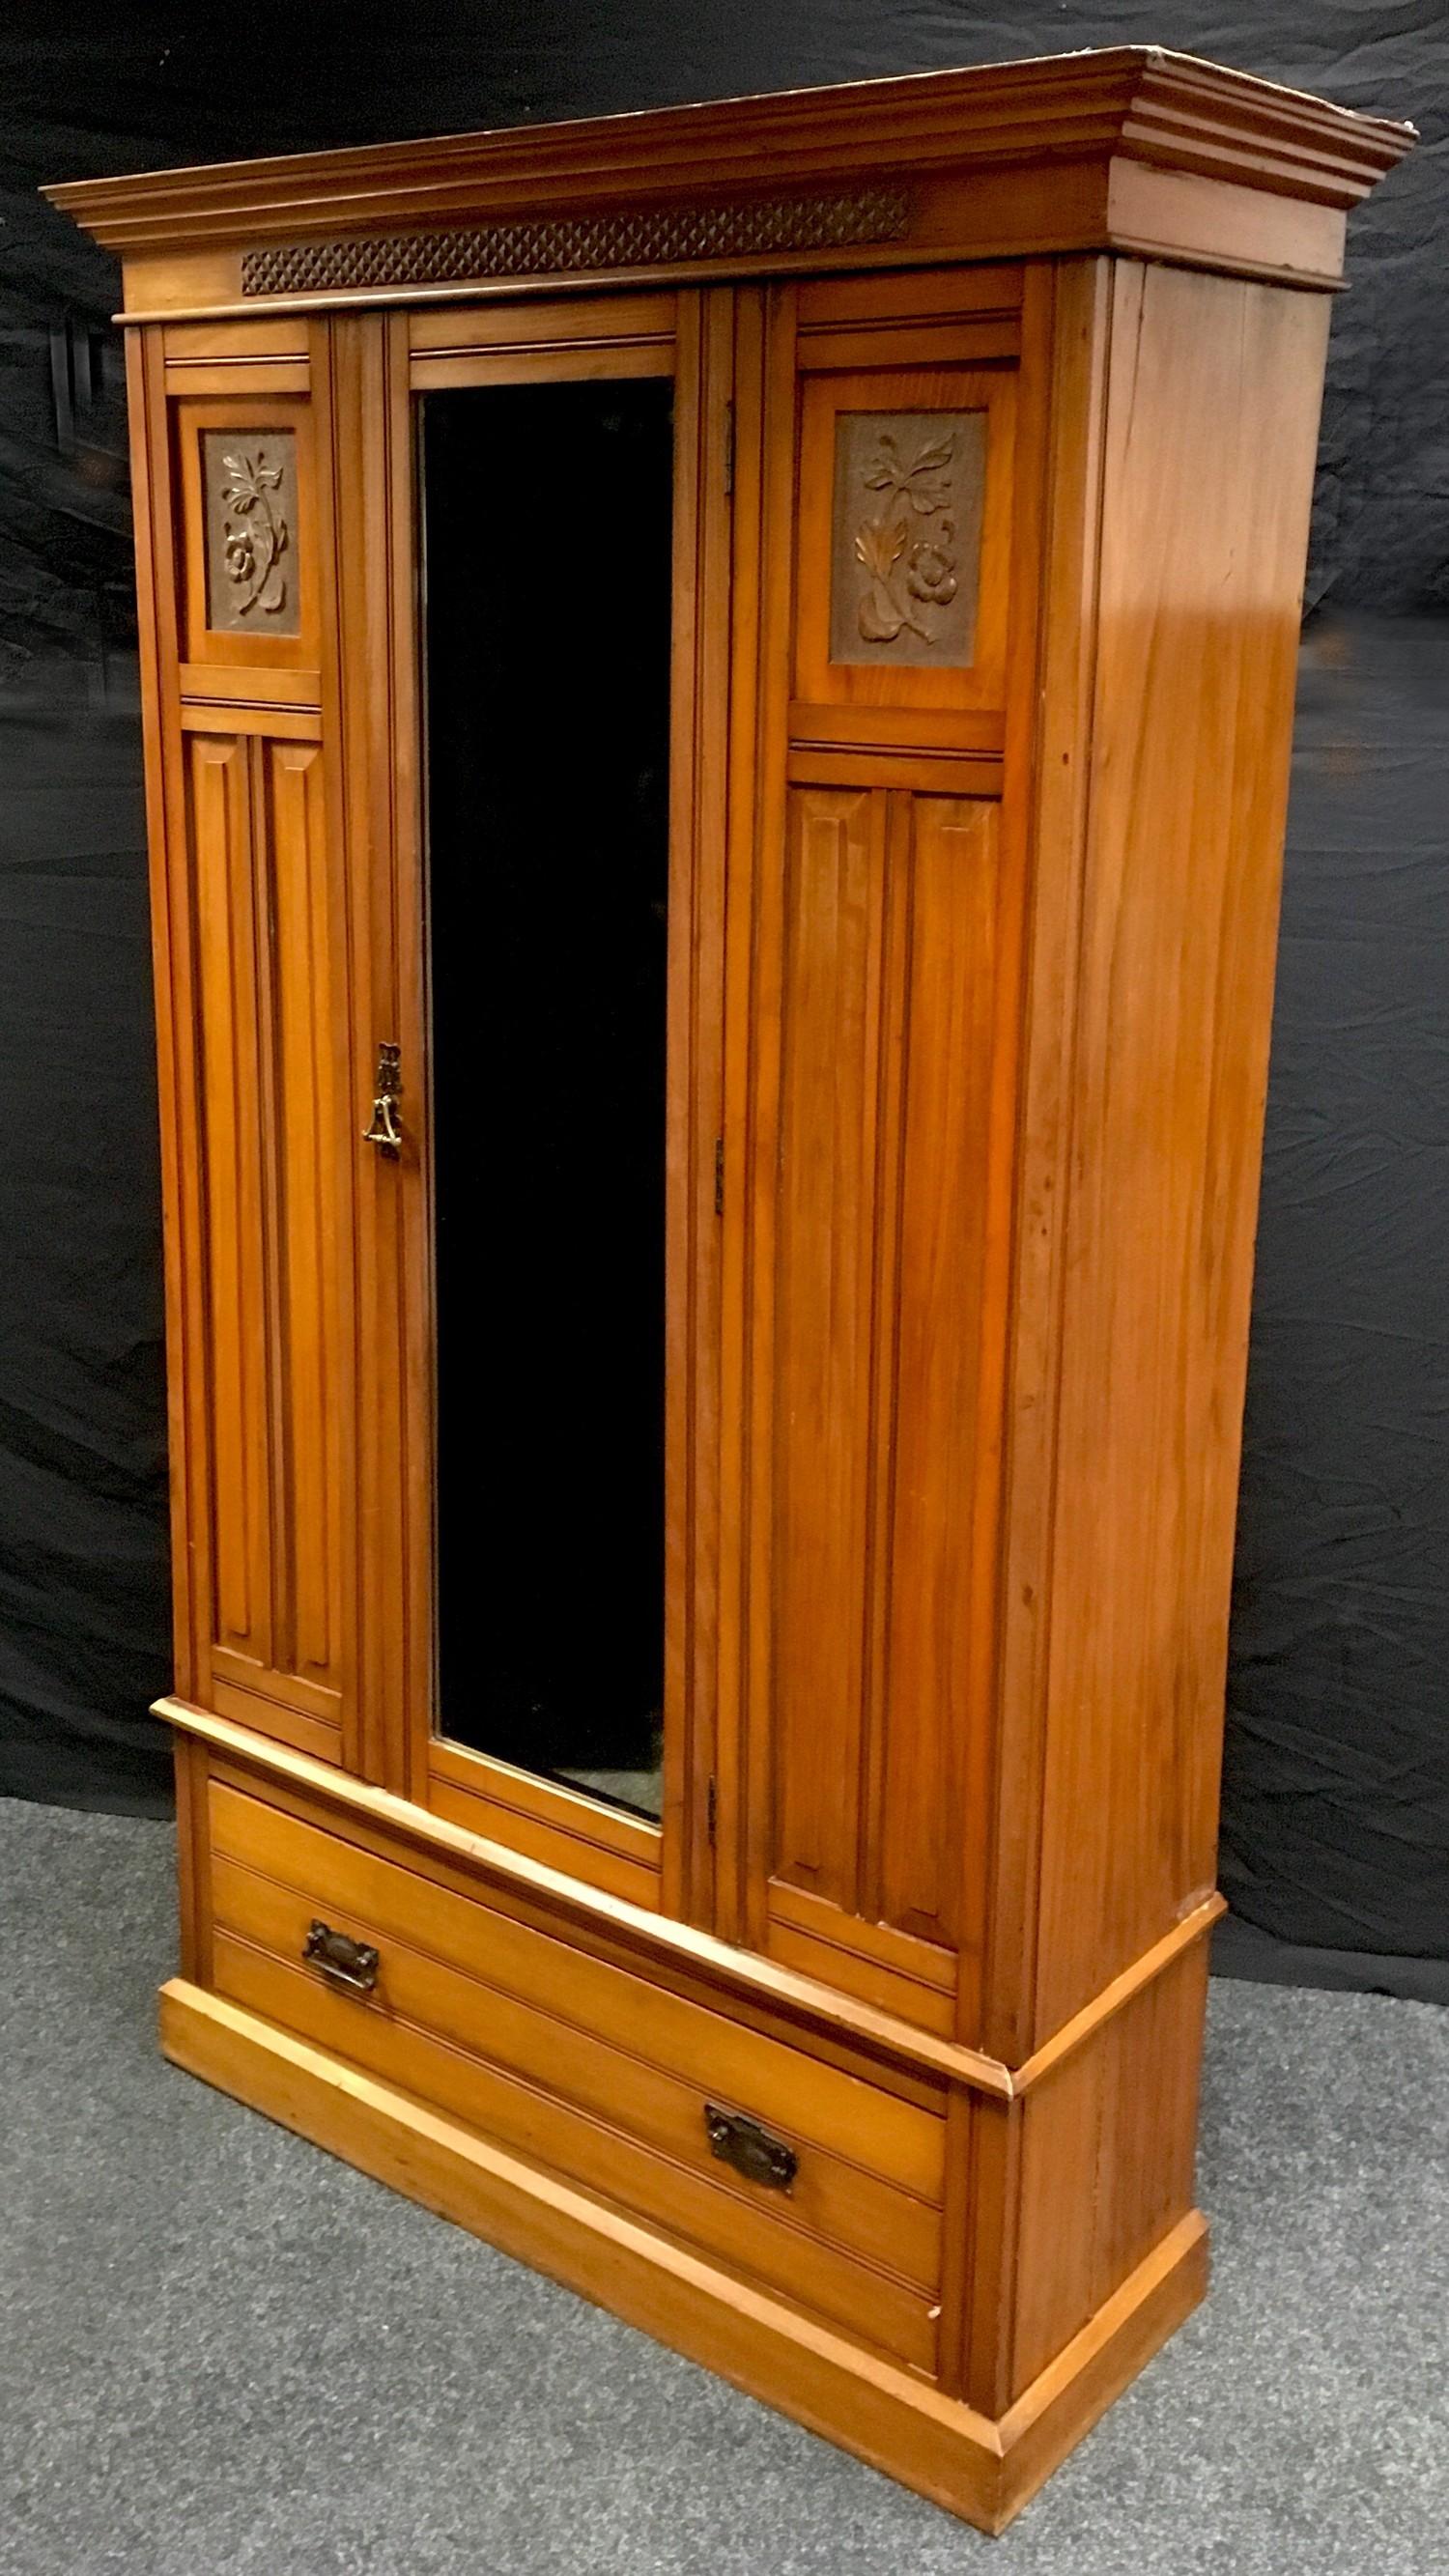 An Edwardian satin walnut wardrobe, stepped cornice, carved frieze, central mirrored door flanked by